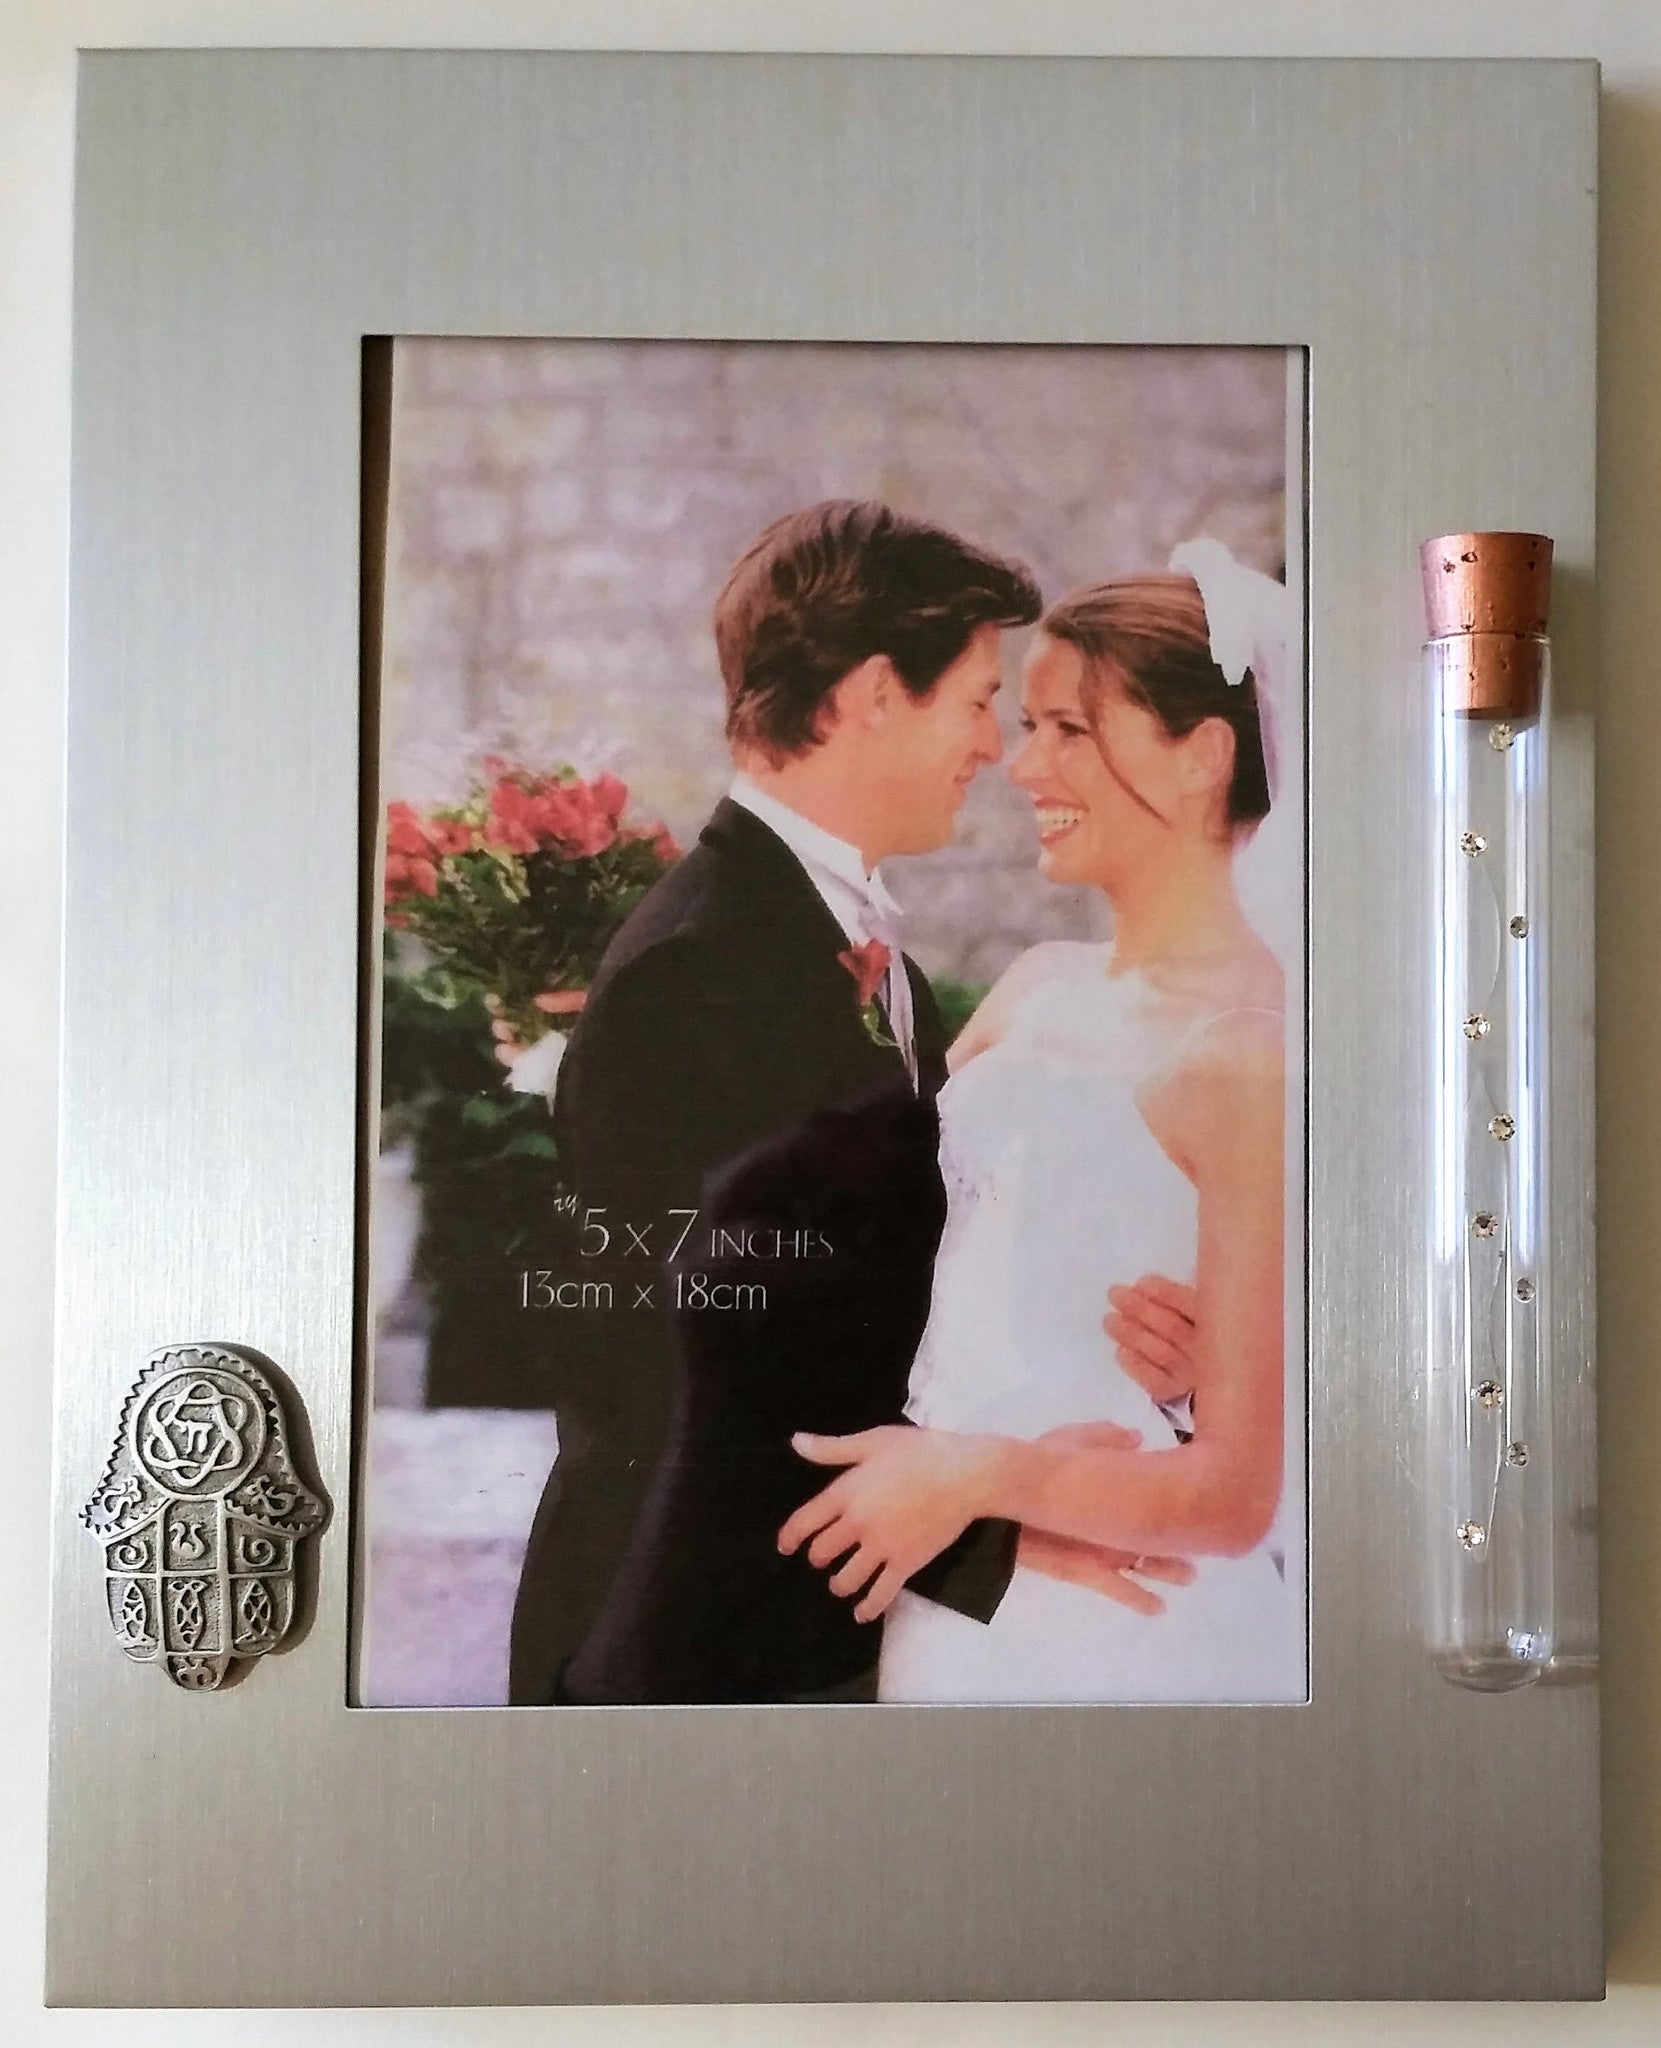 Brush Silver Tone Wedding Picture Frame - Holds Shards From Jewish Wedding Ceremony - Chamsa